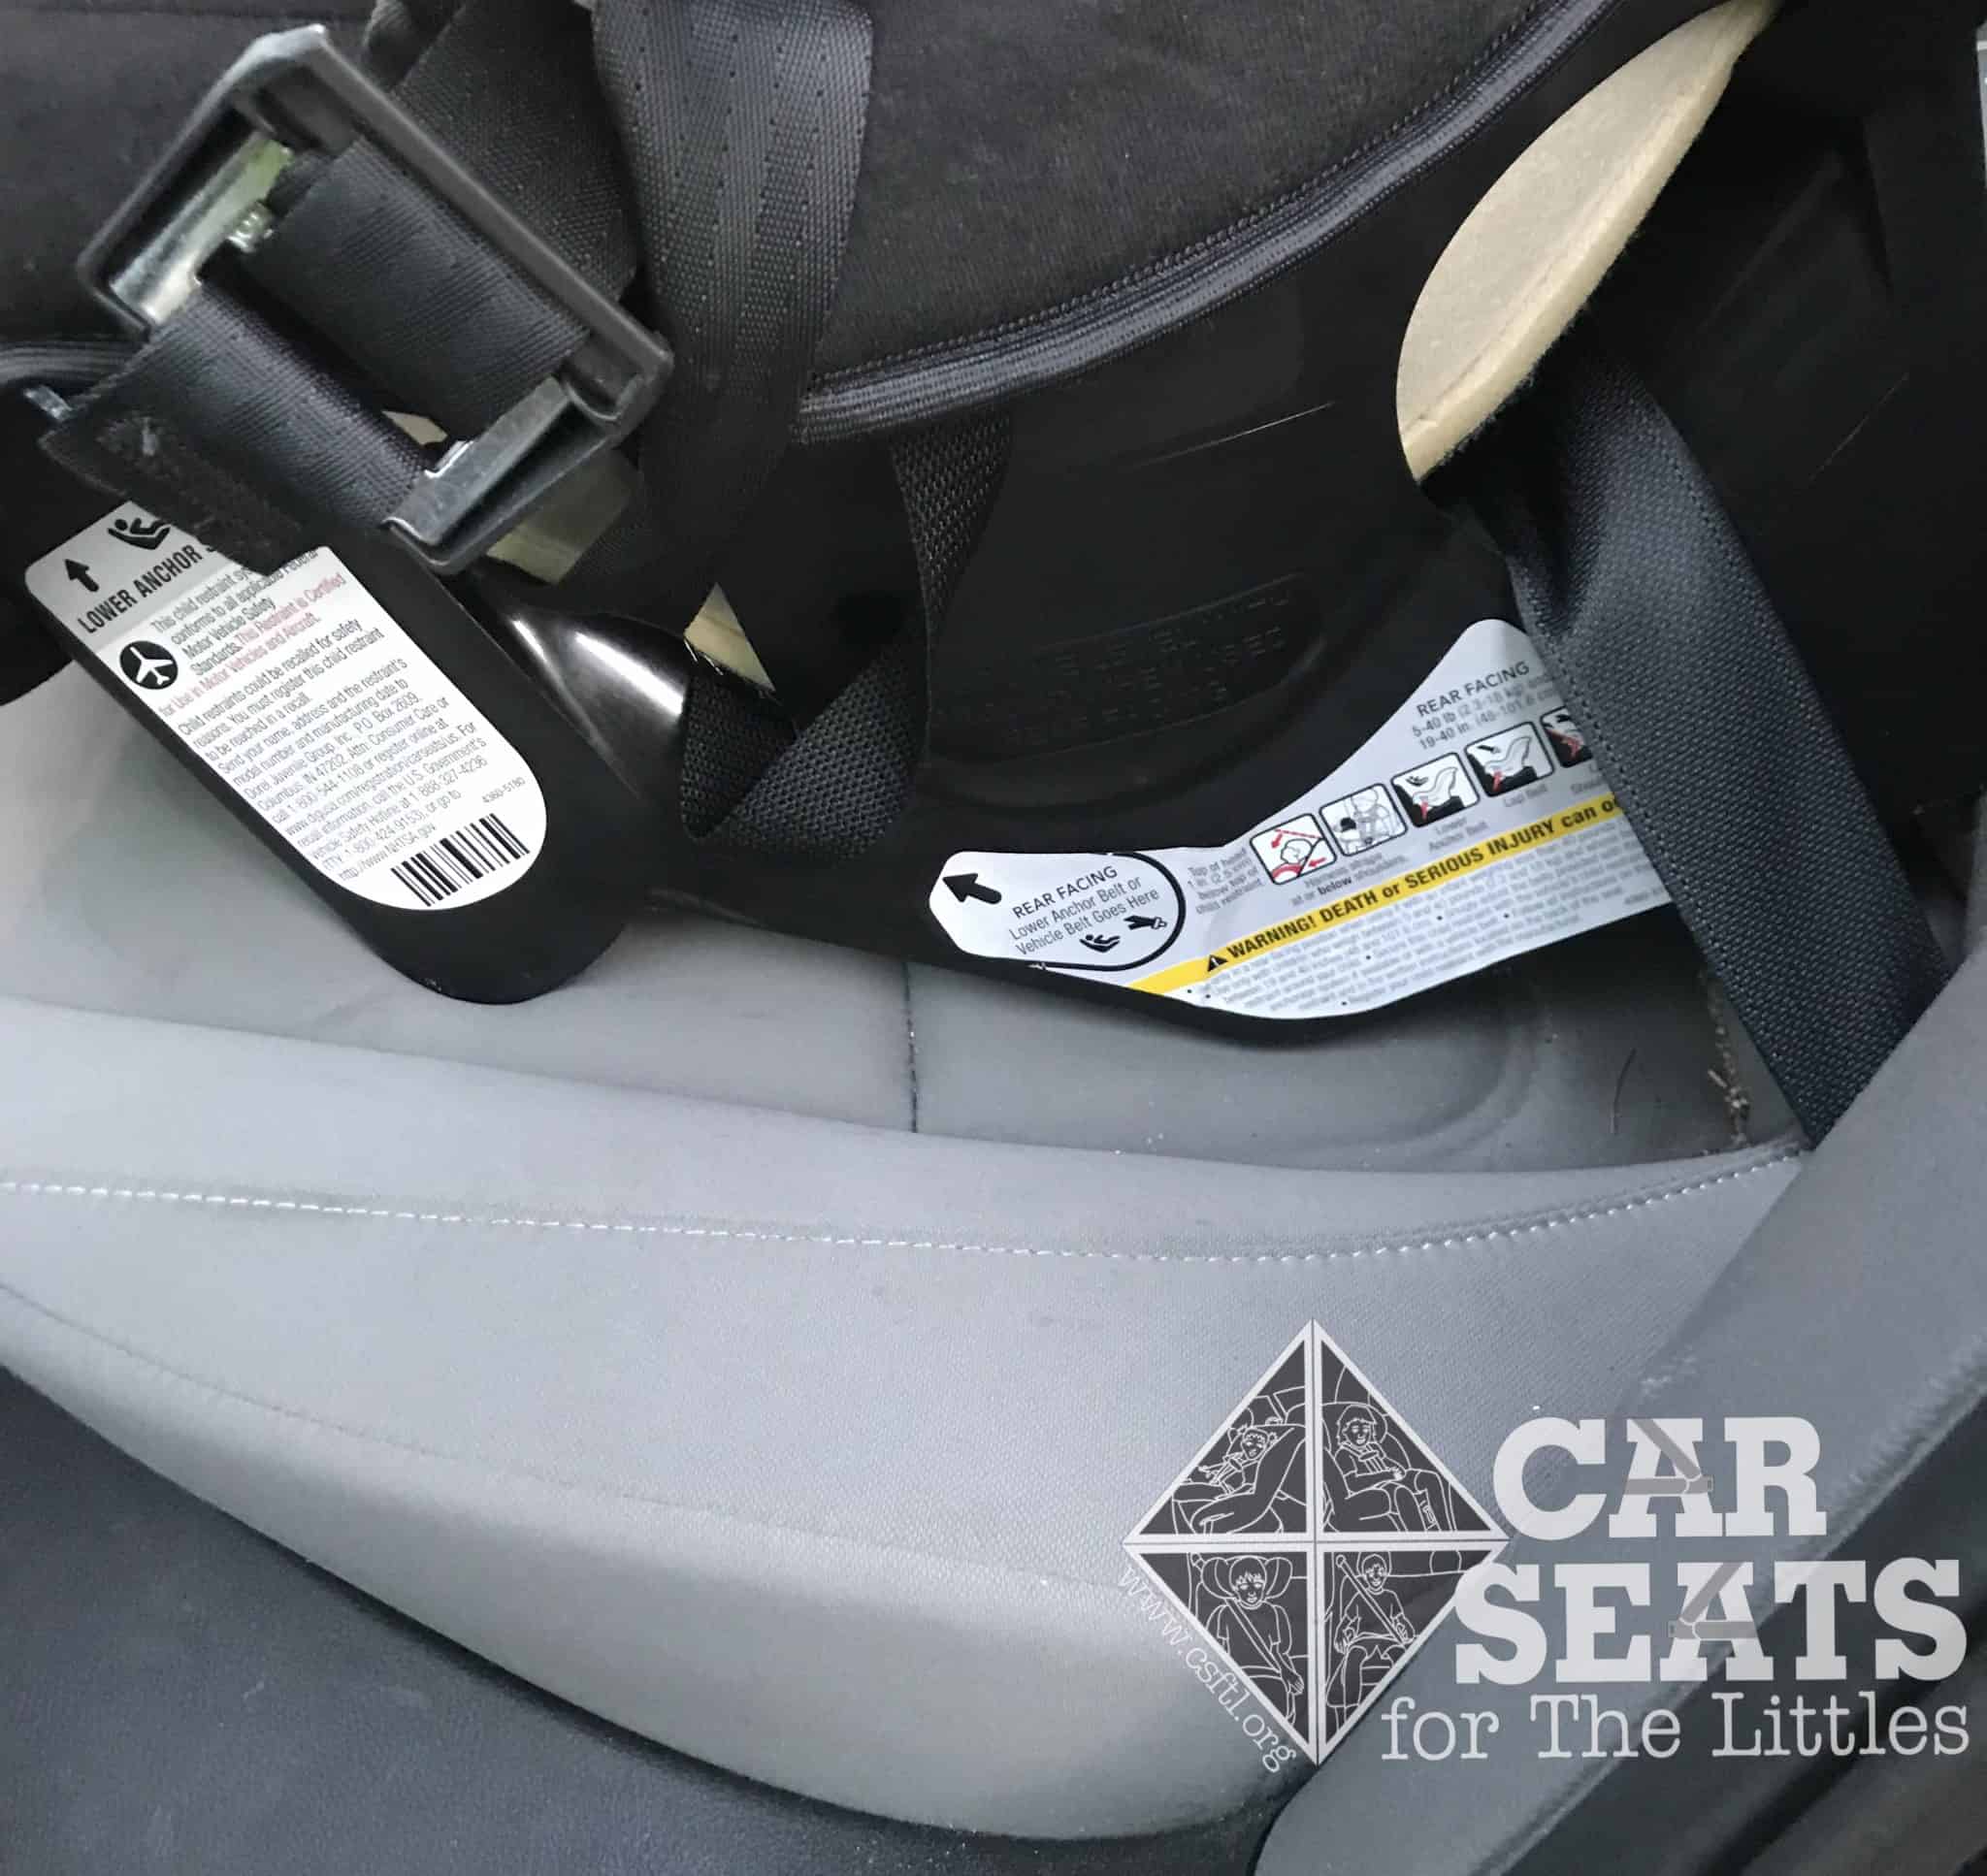 Cosco Scenera Next Review Car Seats For The Littles - Is The Cosco Scenera Car Seat Safe